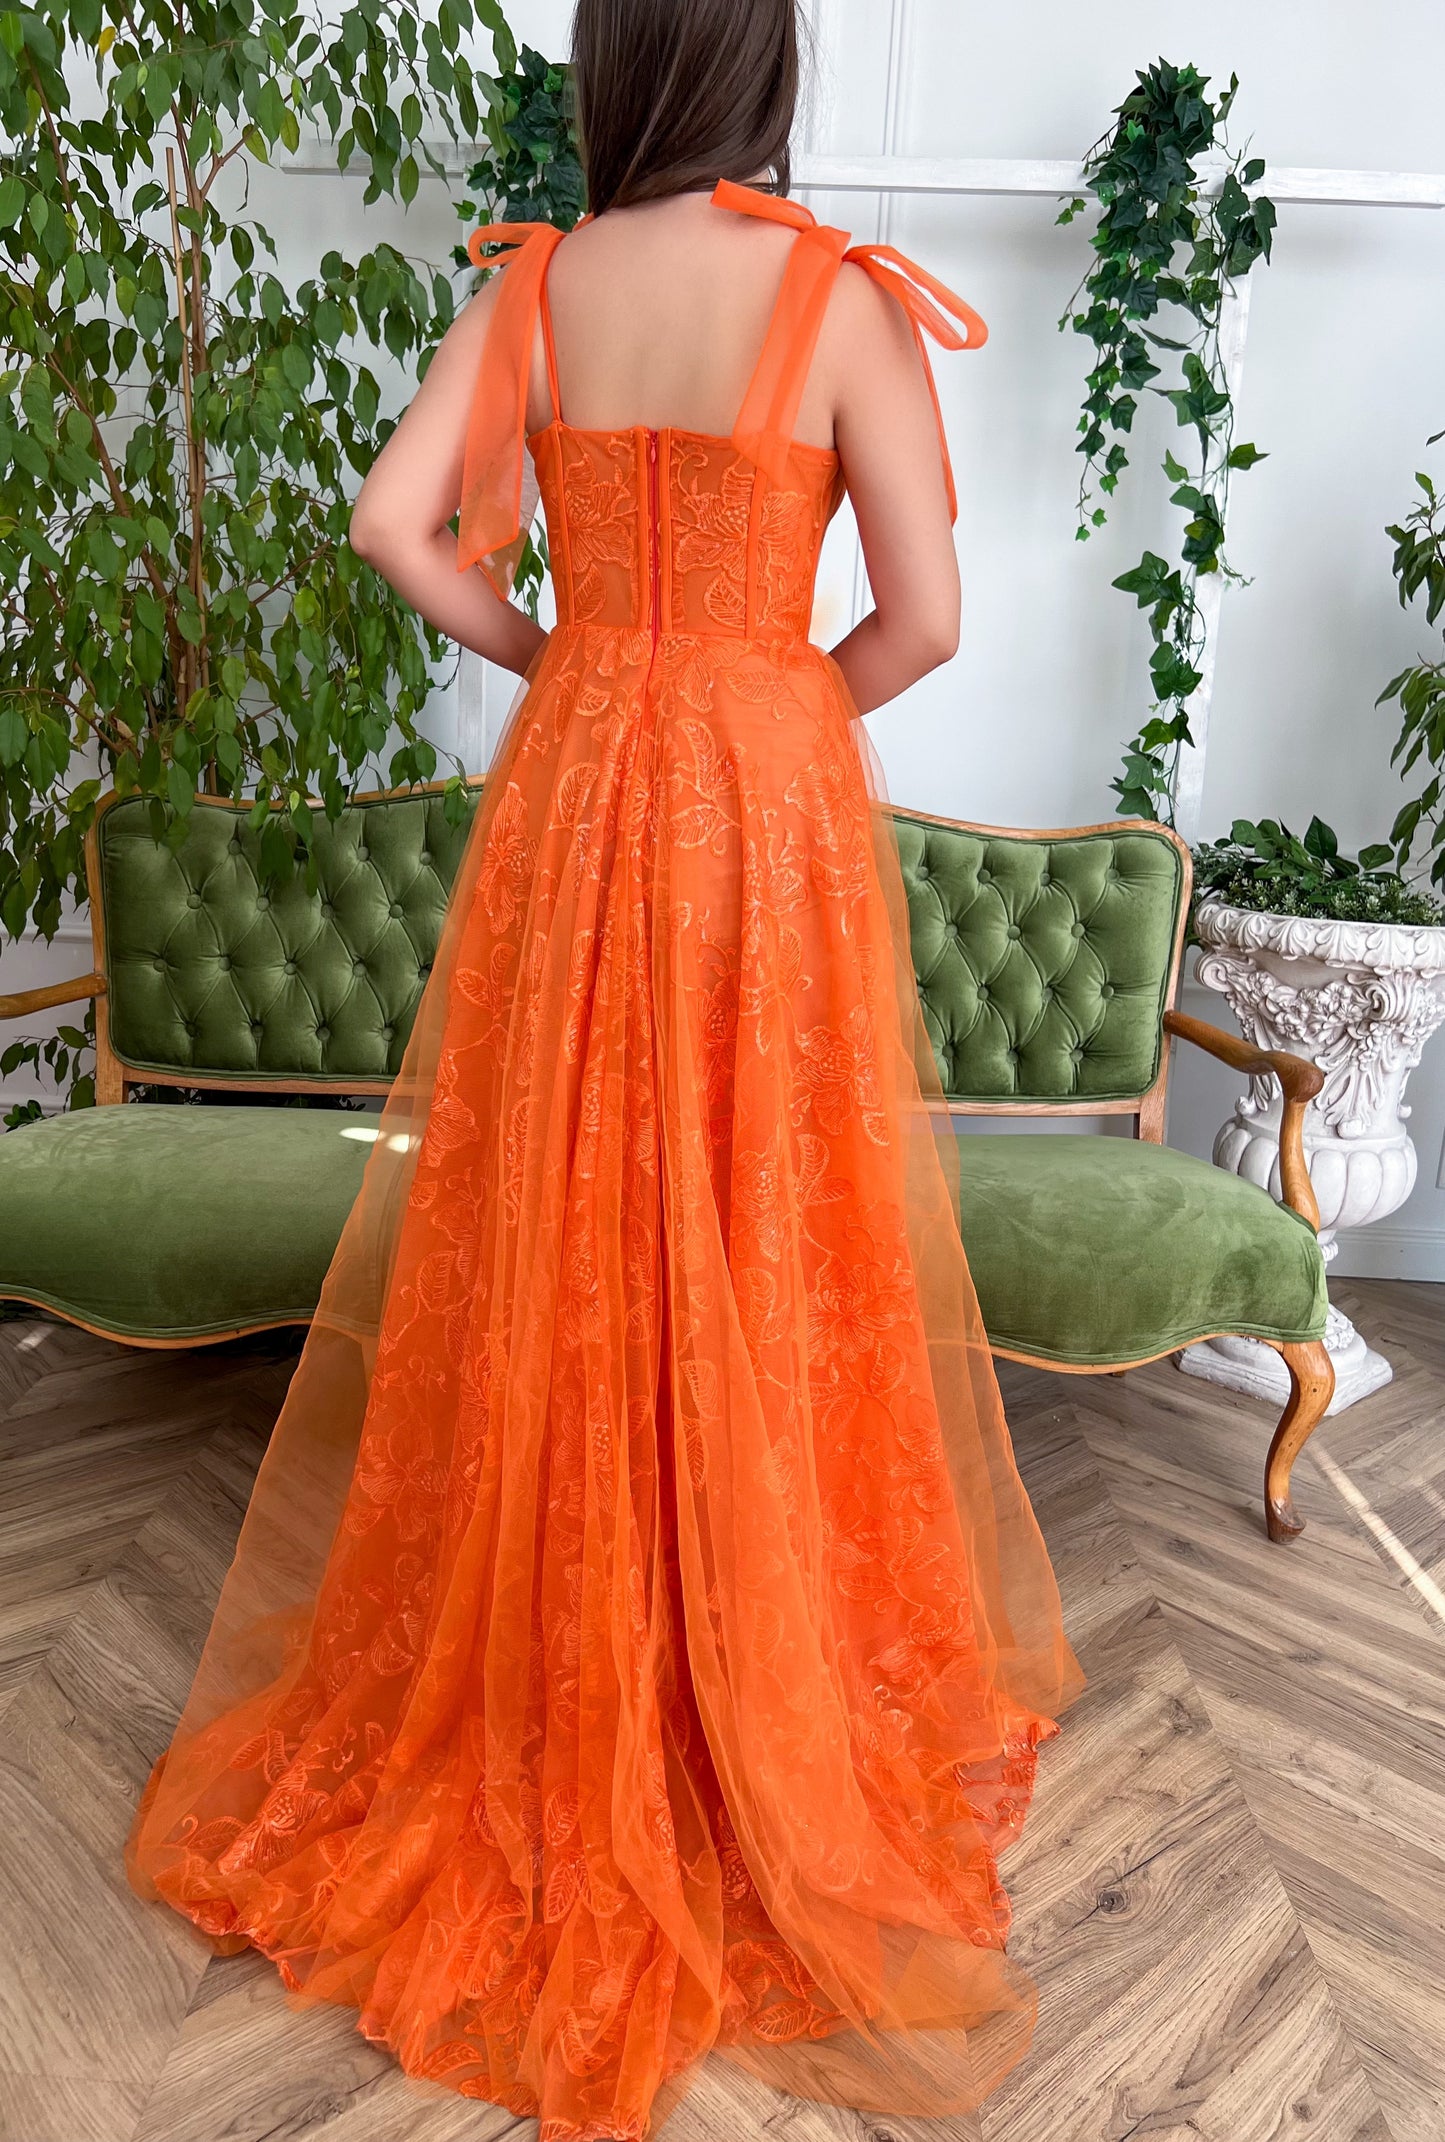 Orange A-Line dress with spaghetti straps, and embroidery